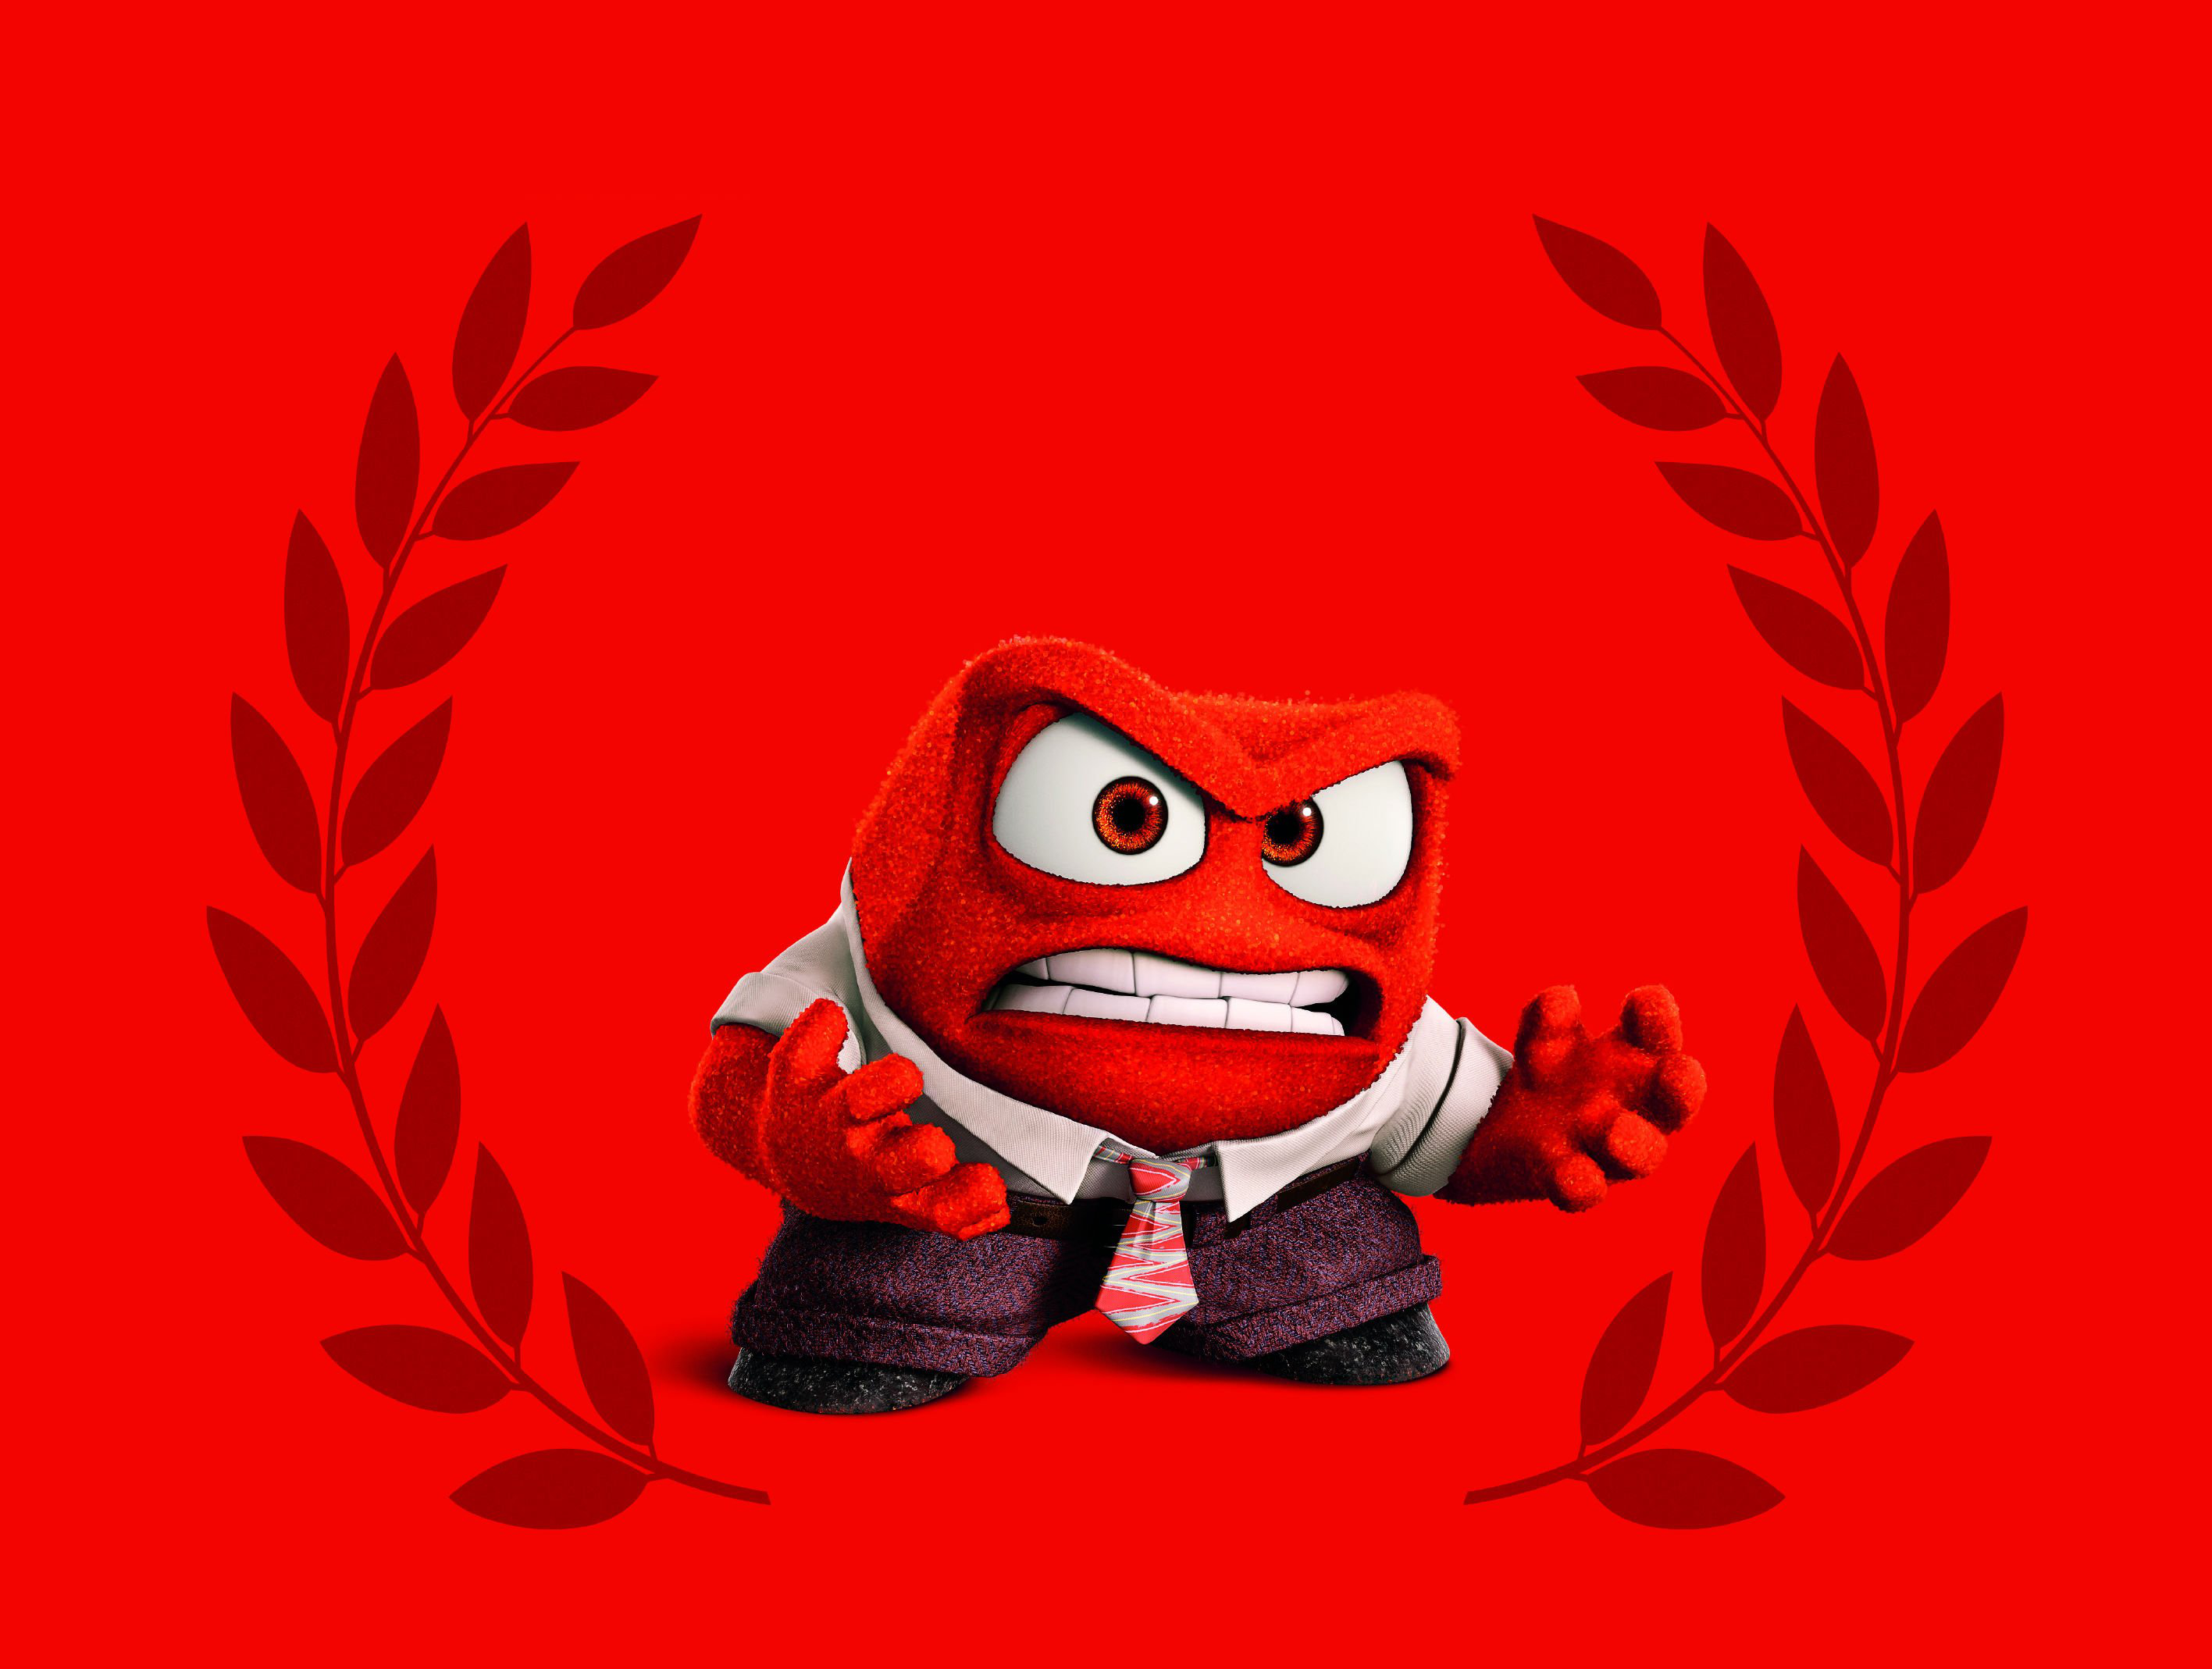 movie, inside out, anger (inside out)